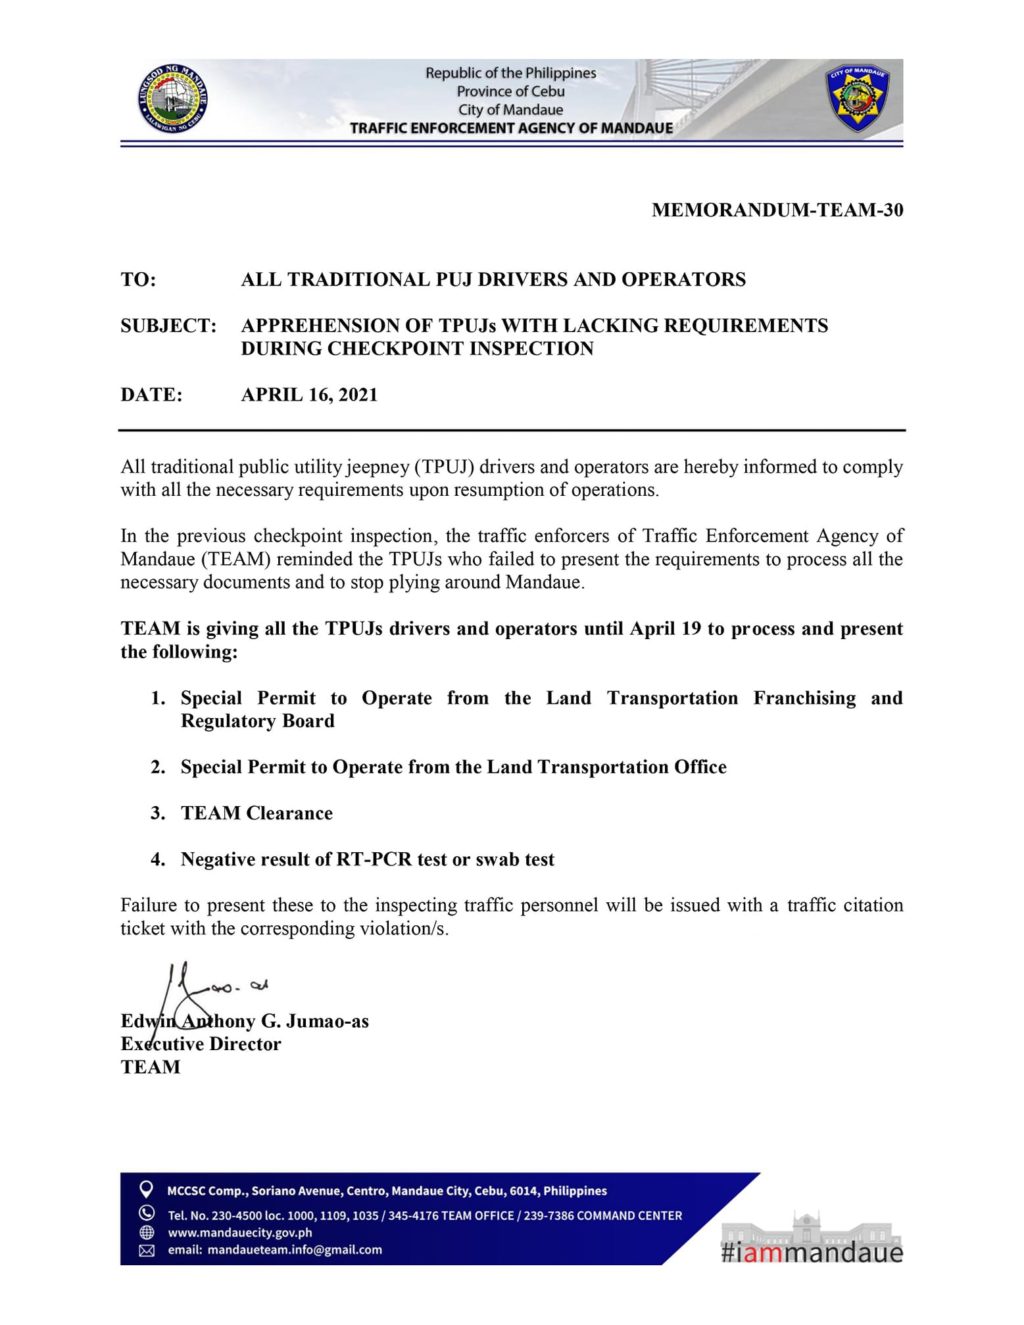 Memo for Mandaue PUJ drivers to comply with requirements to ply their routes.